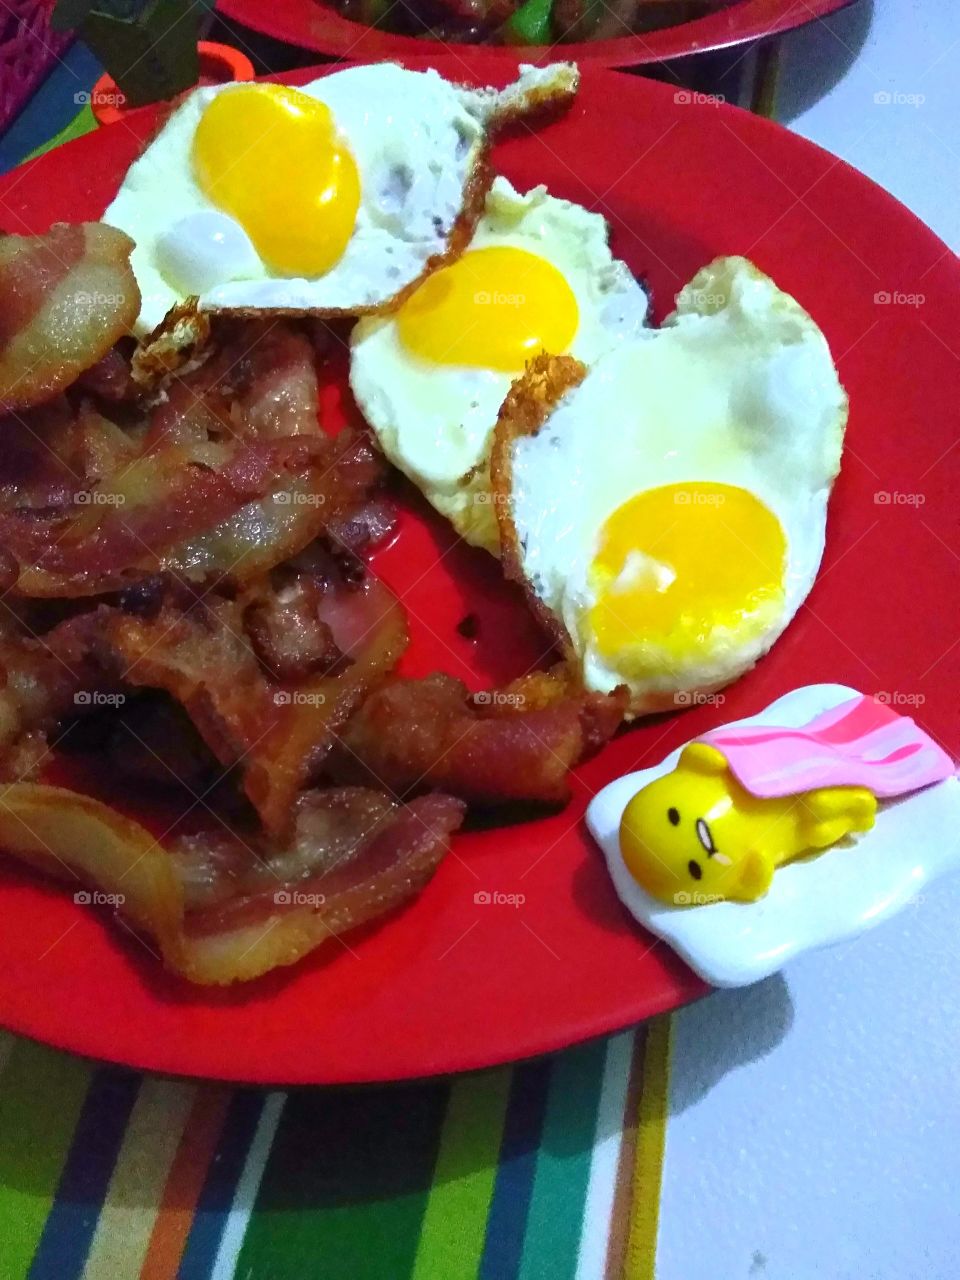 Breakfast Bacon and Eggs